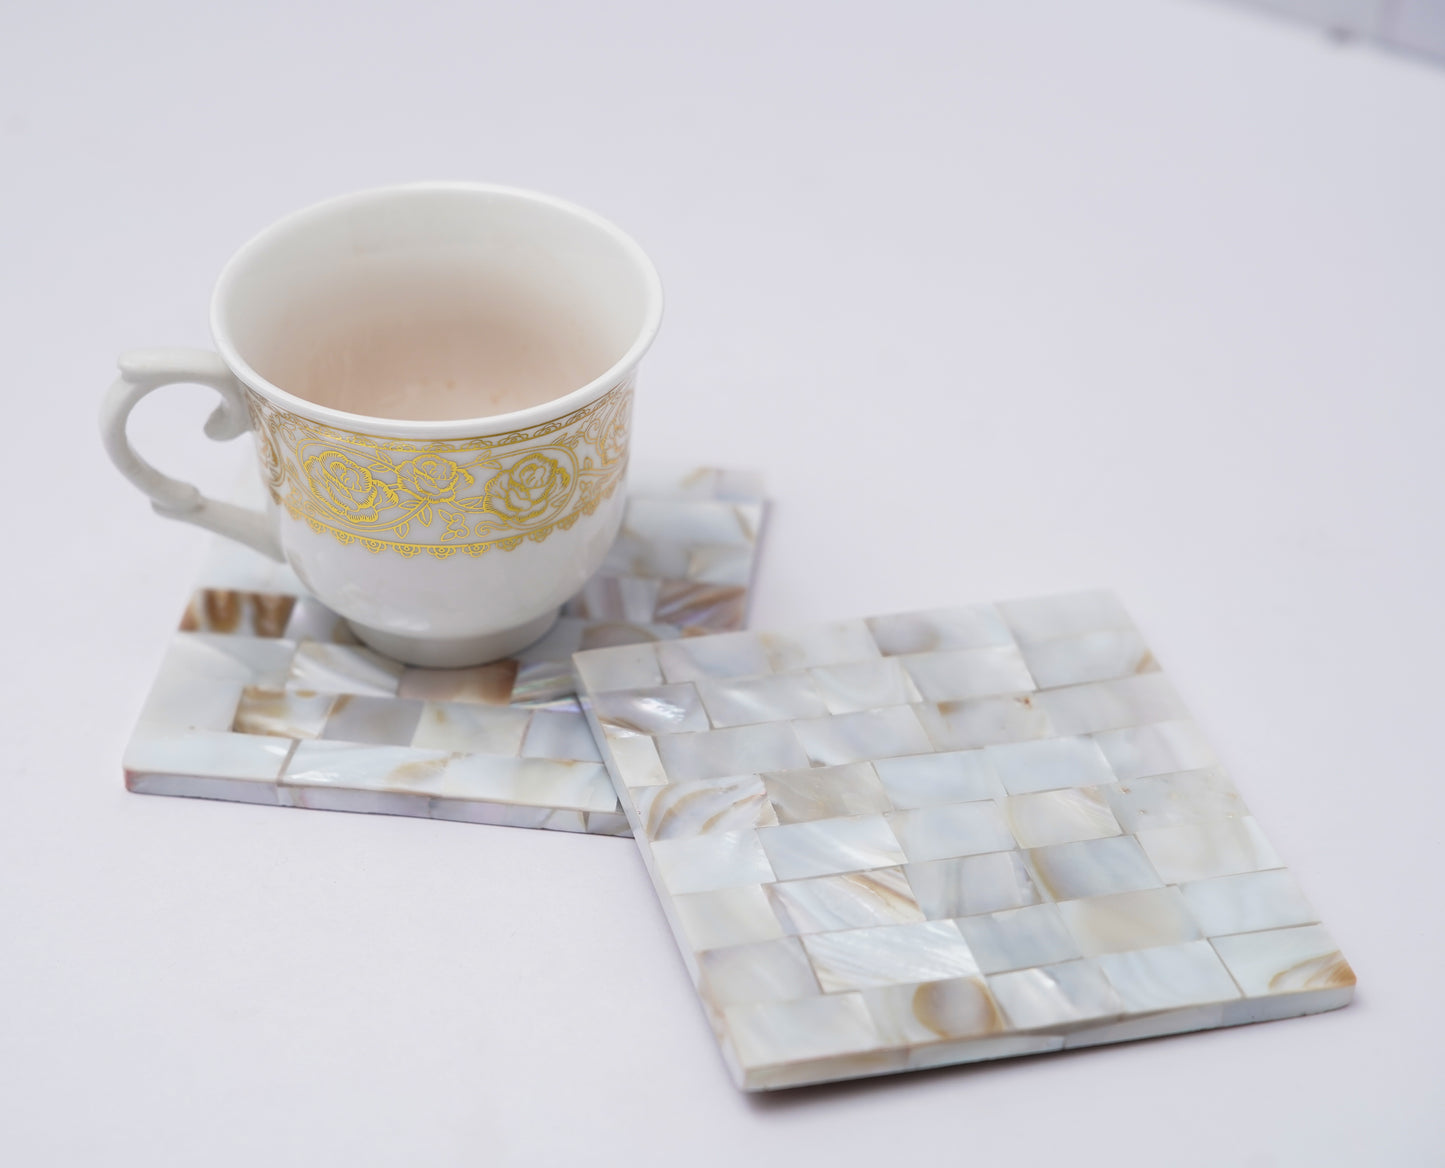 Mother of Pearl Coaster Set of 2 for Tea Coffee Cocktail Handmade MOP Coaster for Hot & Cold Drinks Coaster for Dining Table Home and Office Square- Off White